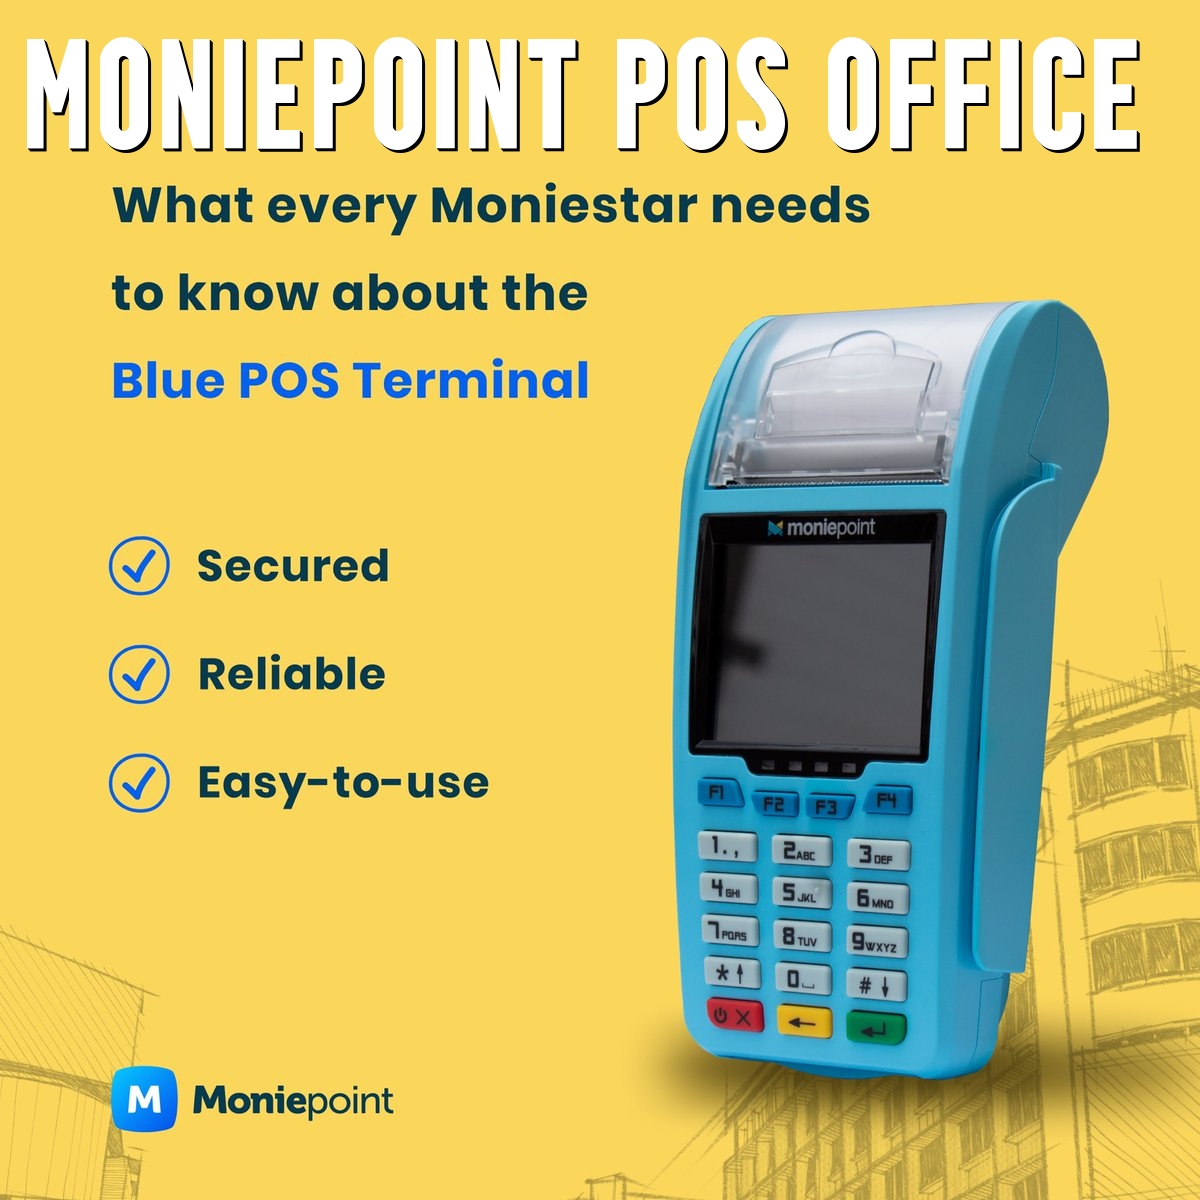 Moniepoint POS Office in Lagos